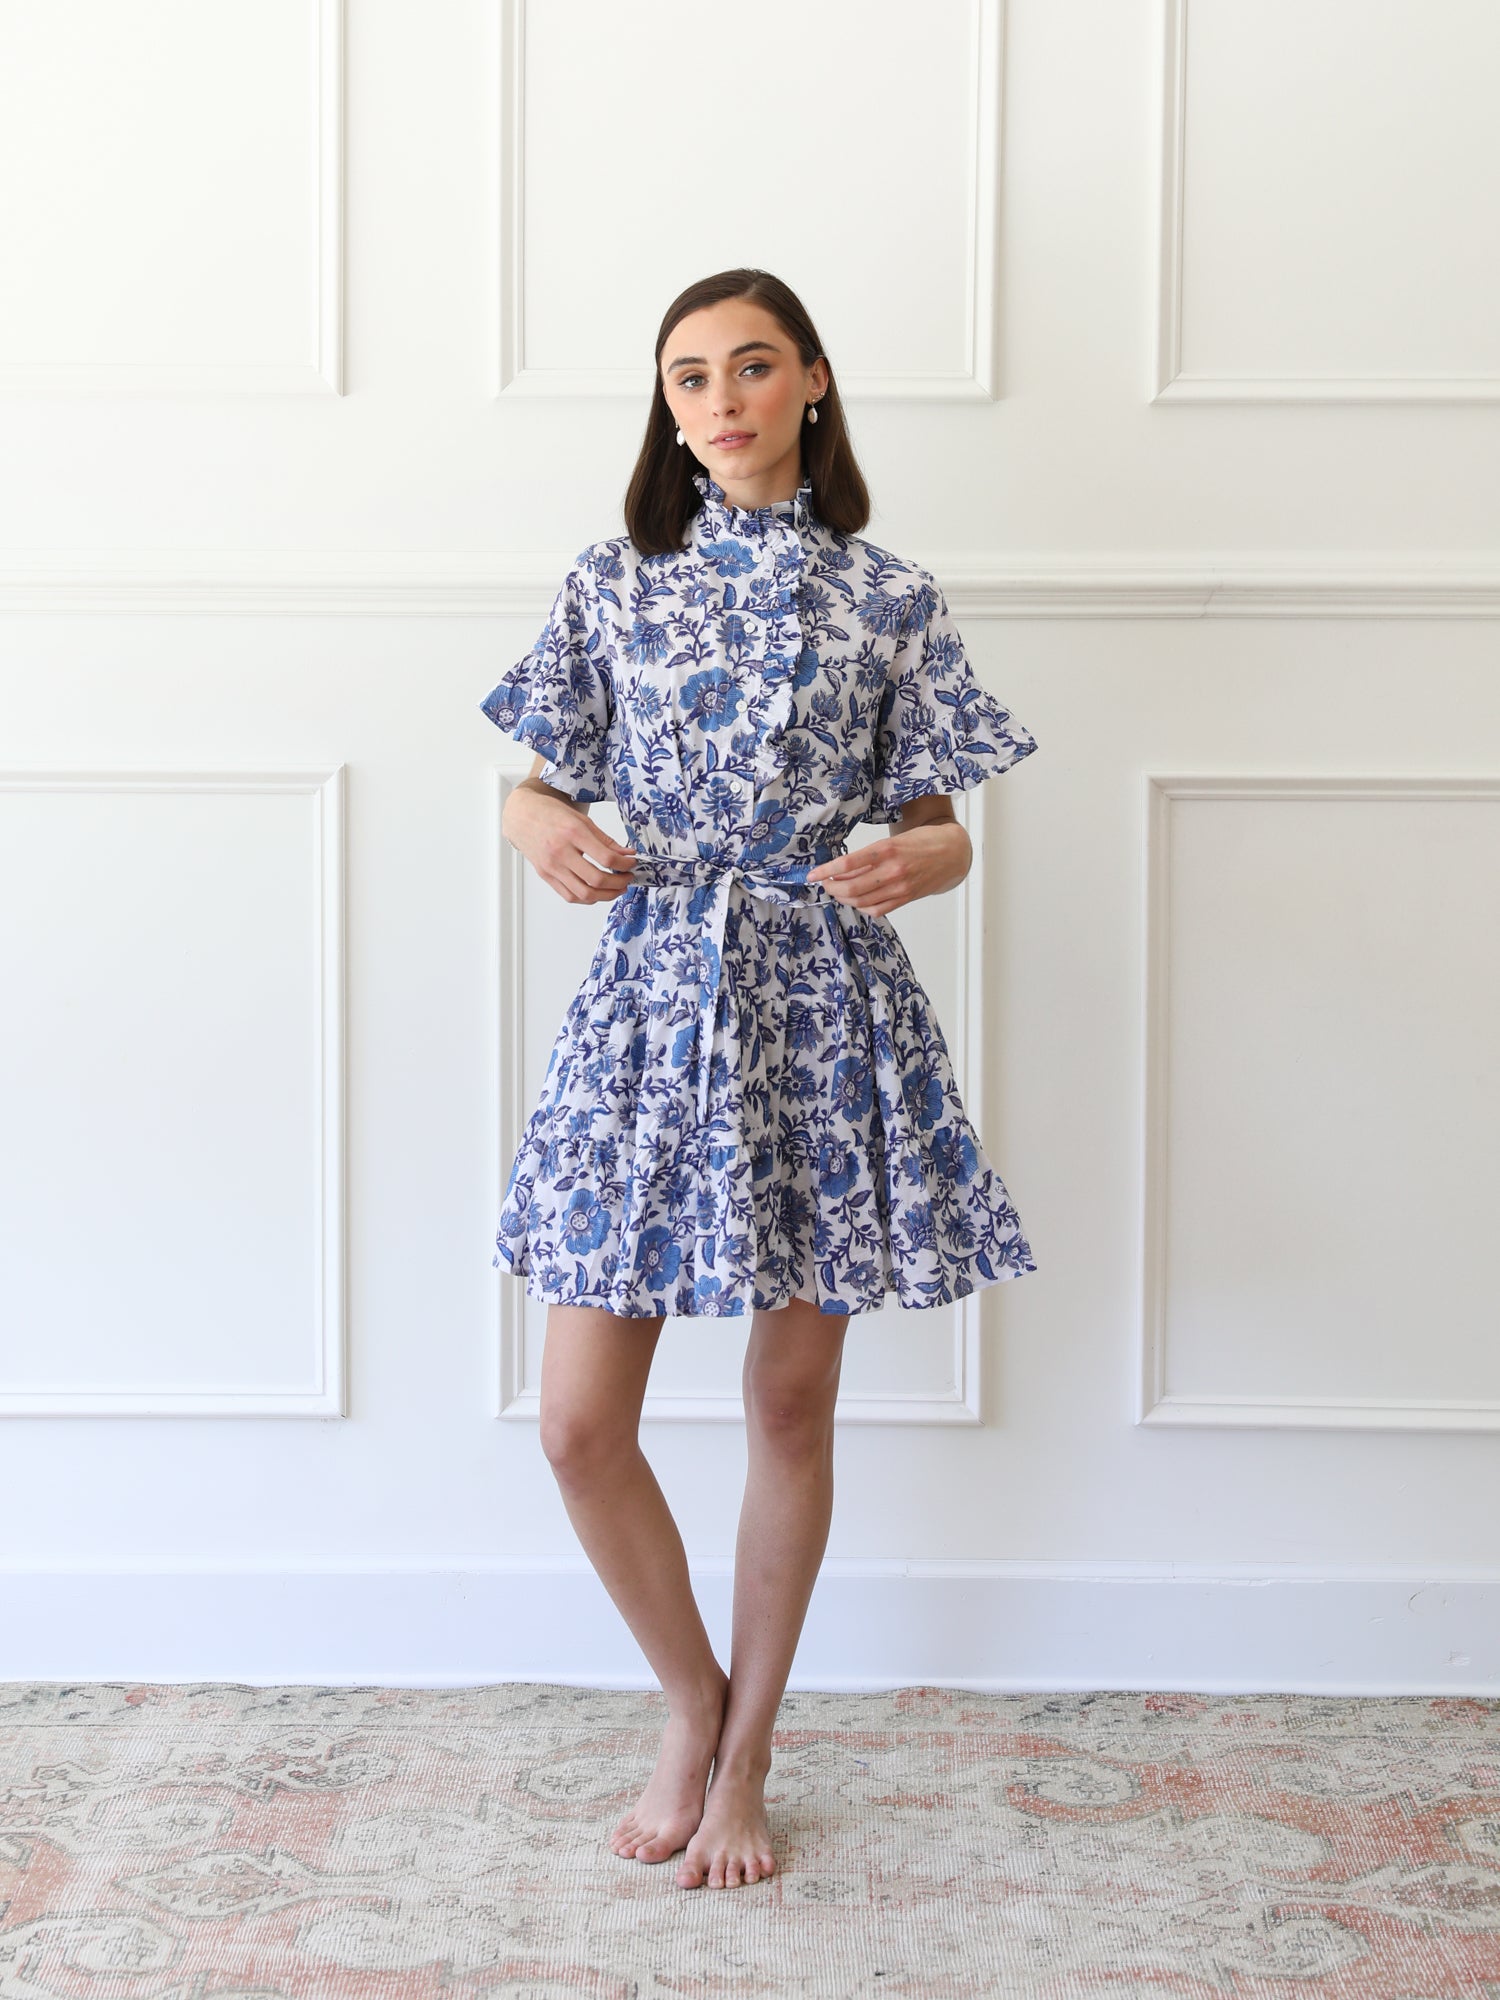 MILLE Clothing Violetta Dress in Blue Floral